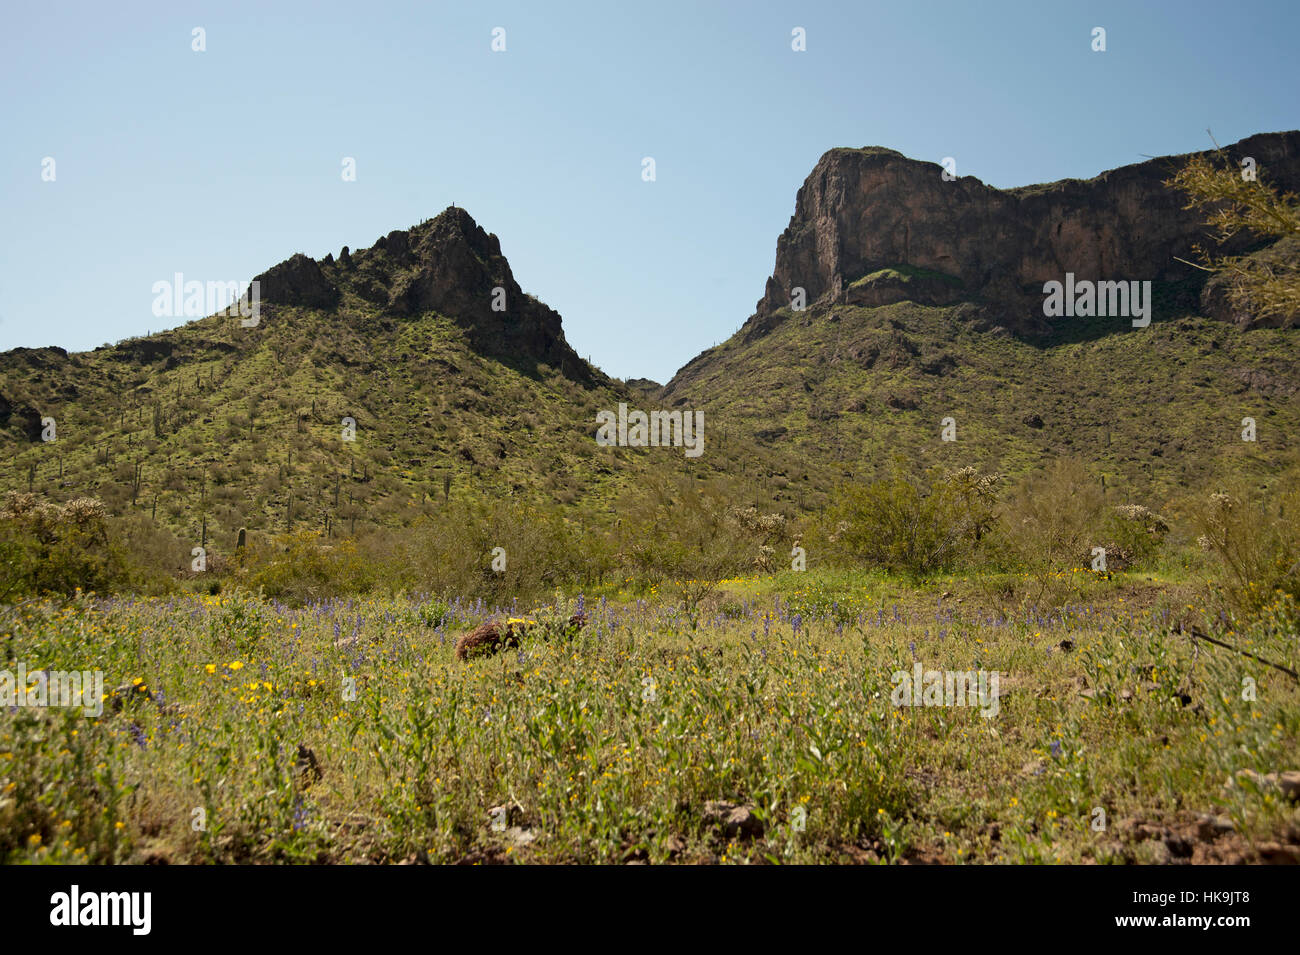 Canyon in the Picacho Peak State Park with Picacho Peak and smaller hill.  Some Daisies and purple flowers in the foreground. Stock Photo